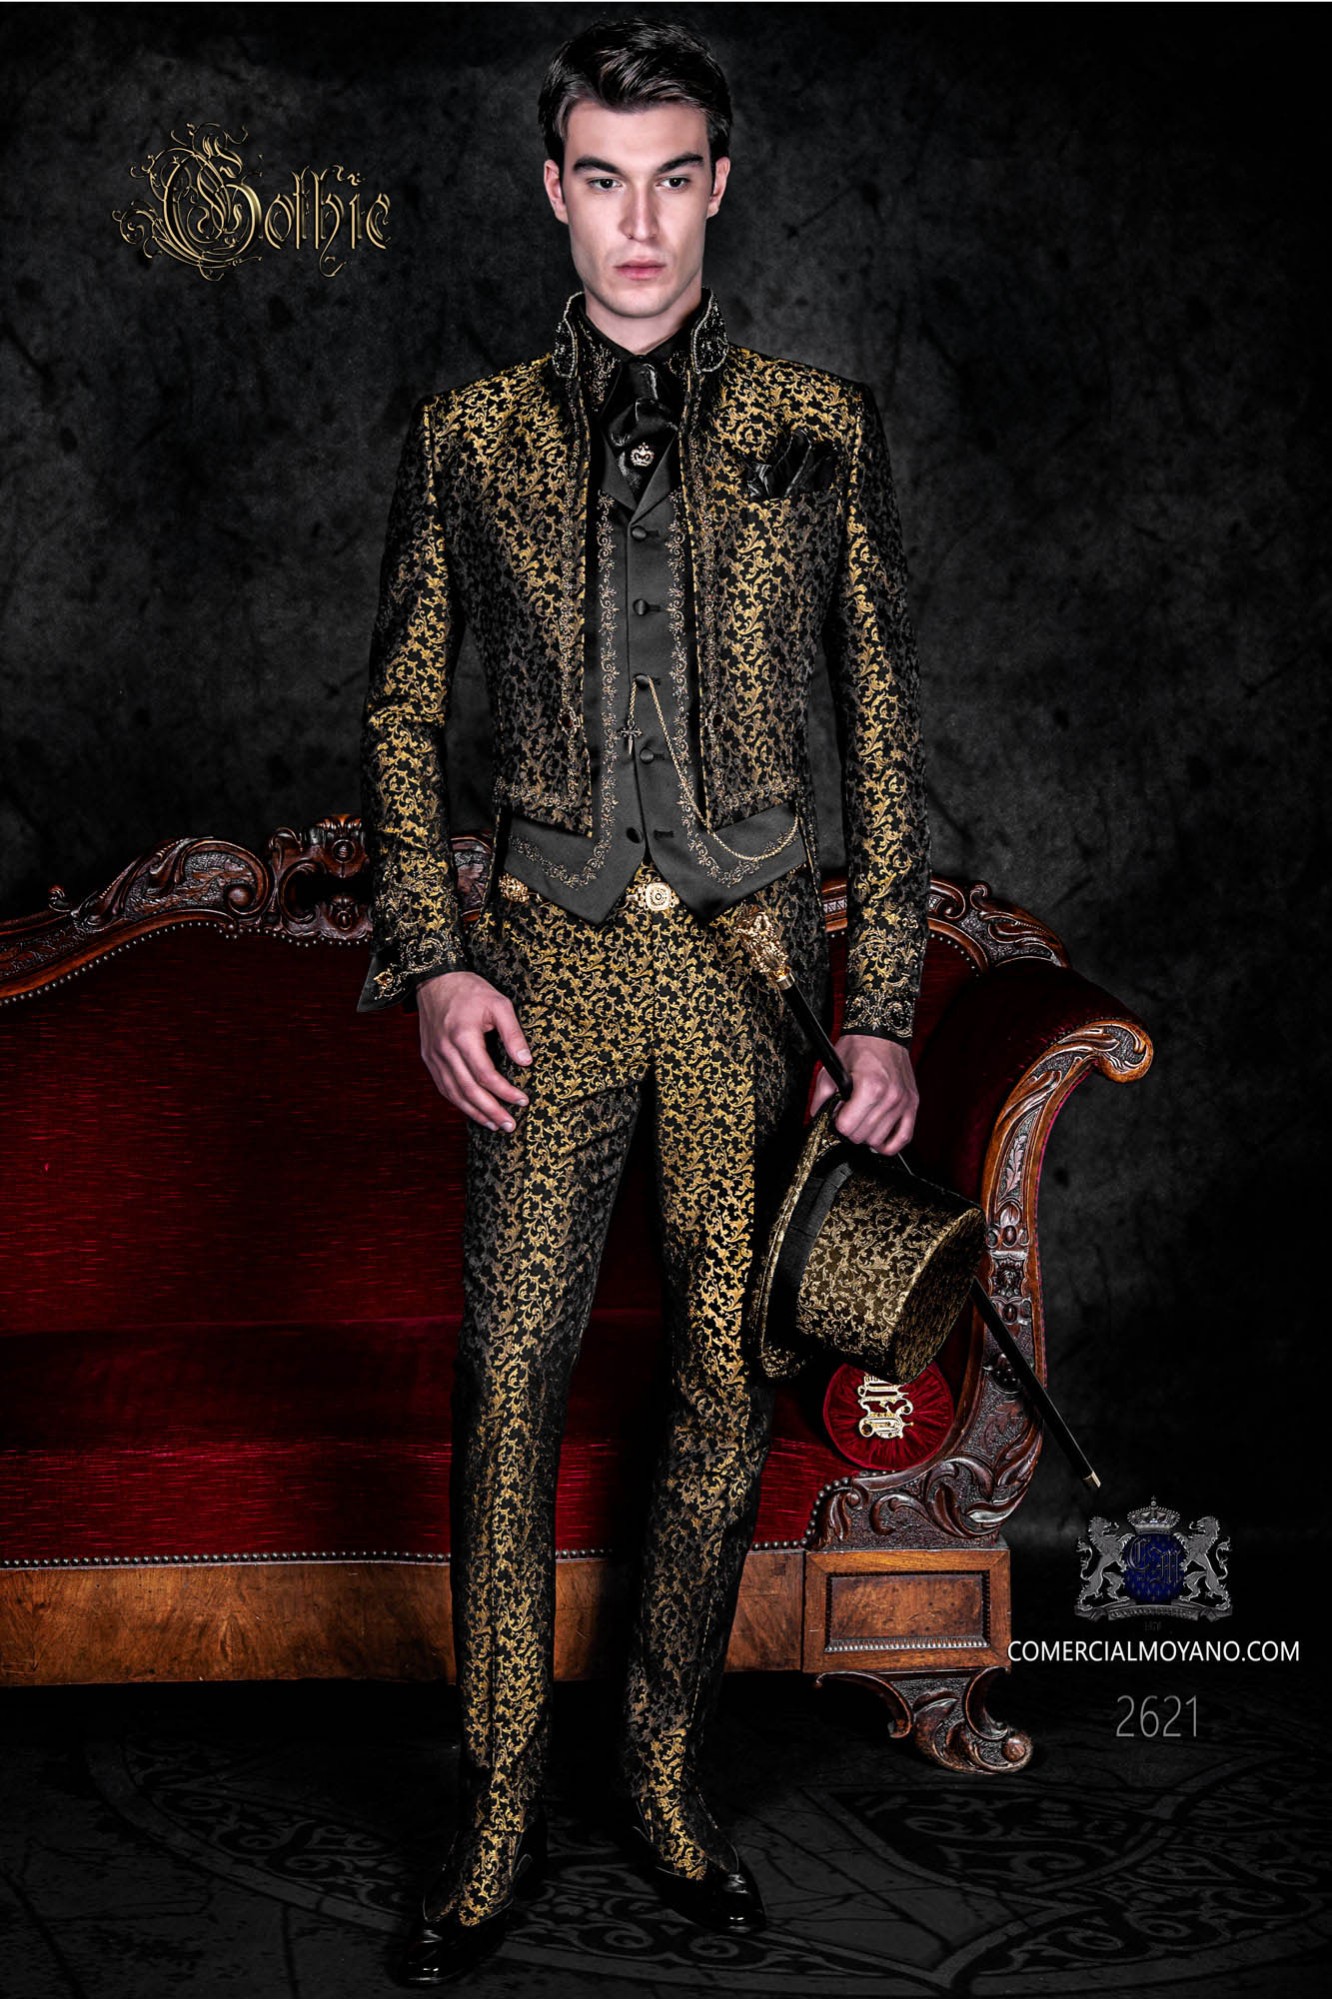 Baroque gold and black jacquard tailcoat with gold embroidery, crystal rhinestones on Mao collar and crystal brooch model 2621 Mario Moyano